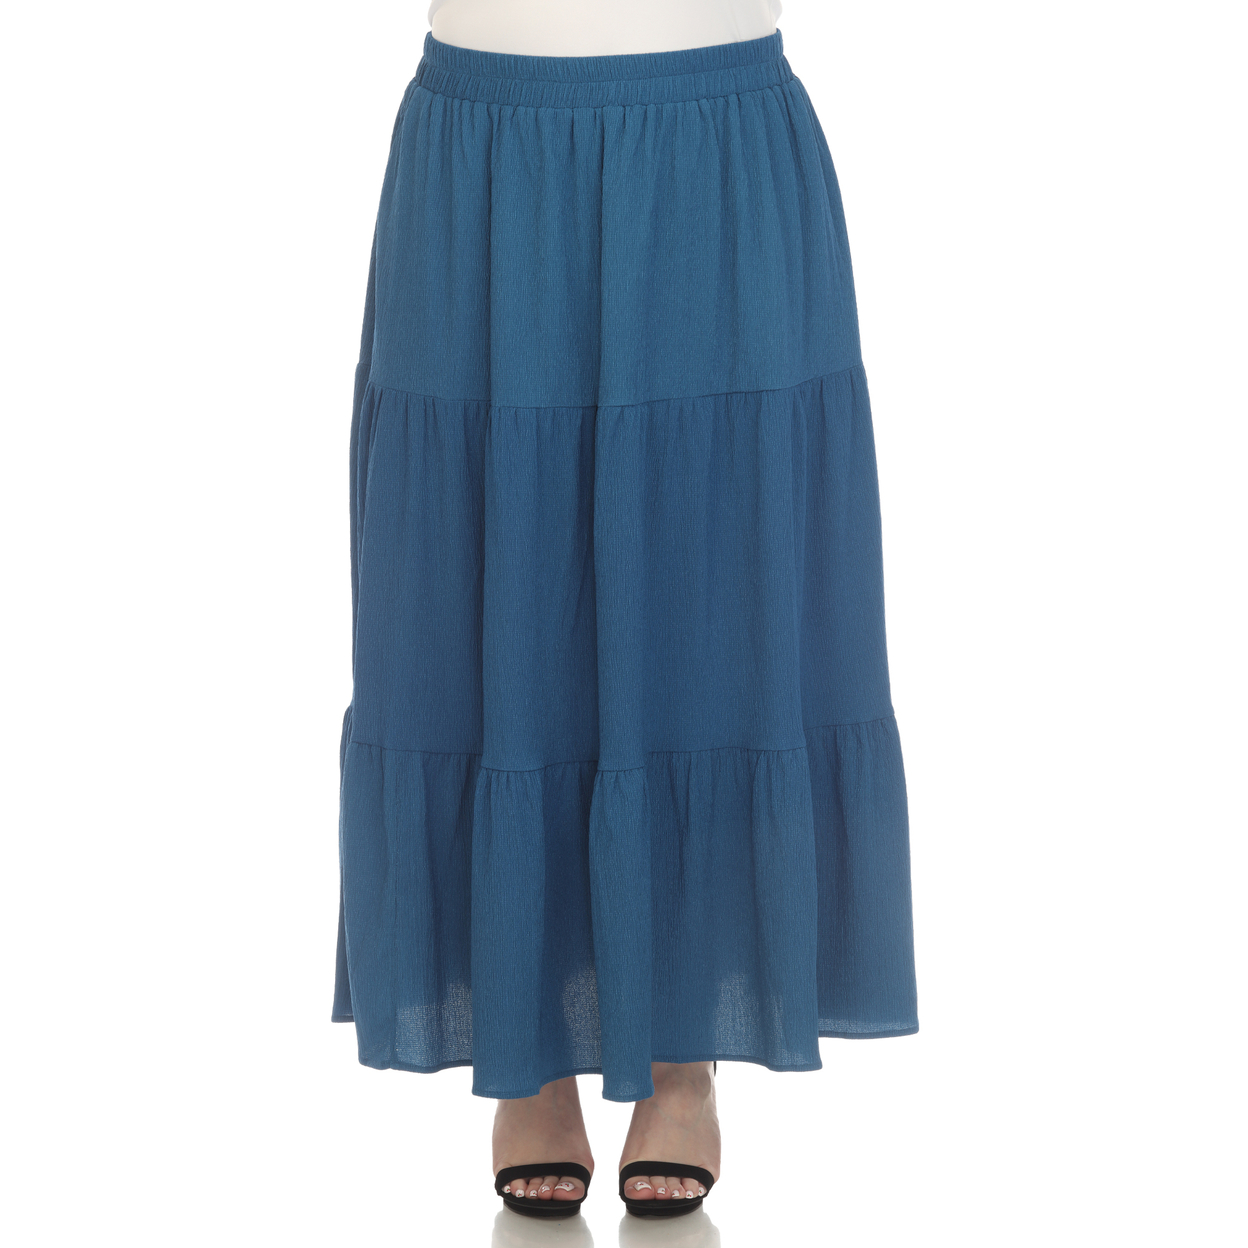 White Mark Women's Pleated Tiered Maxi Skirt - Royal, 3x